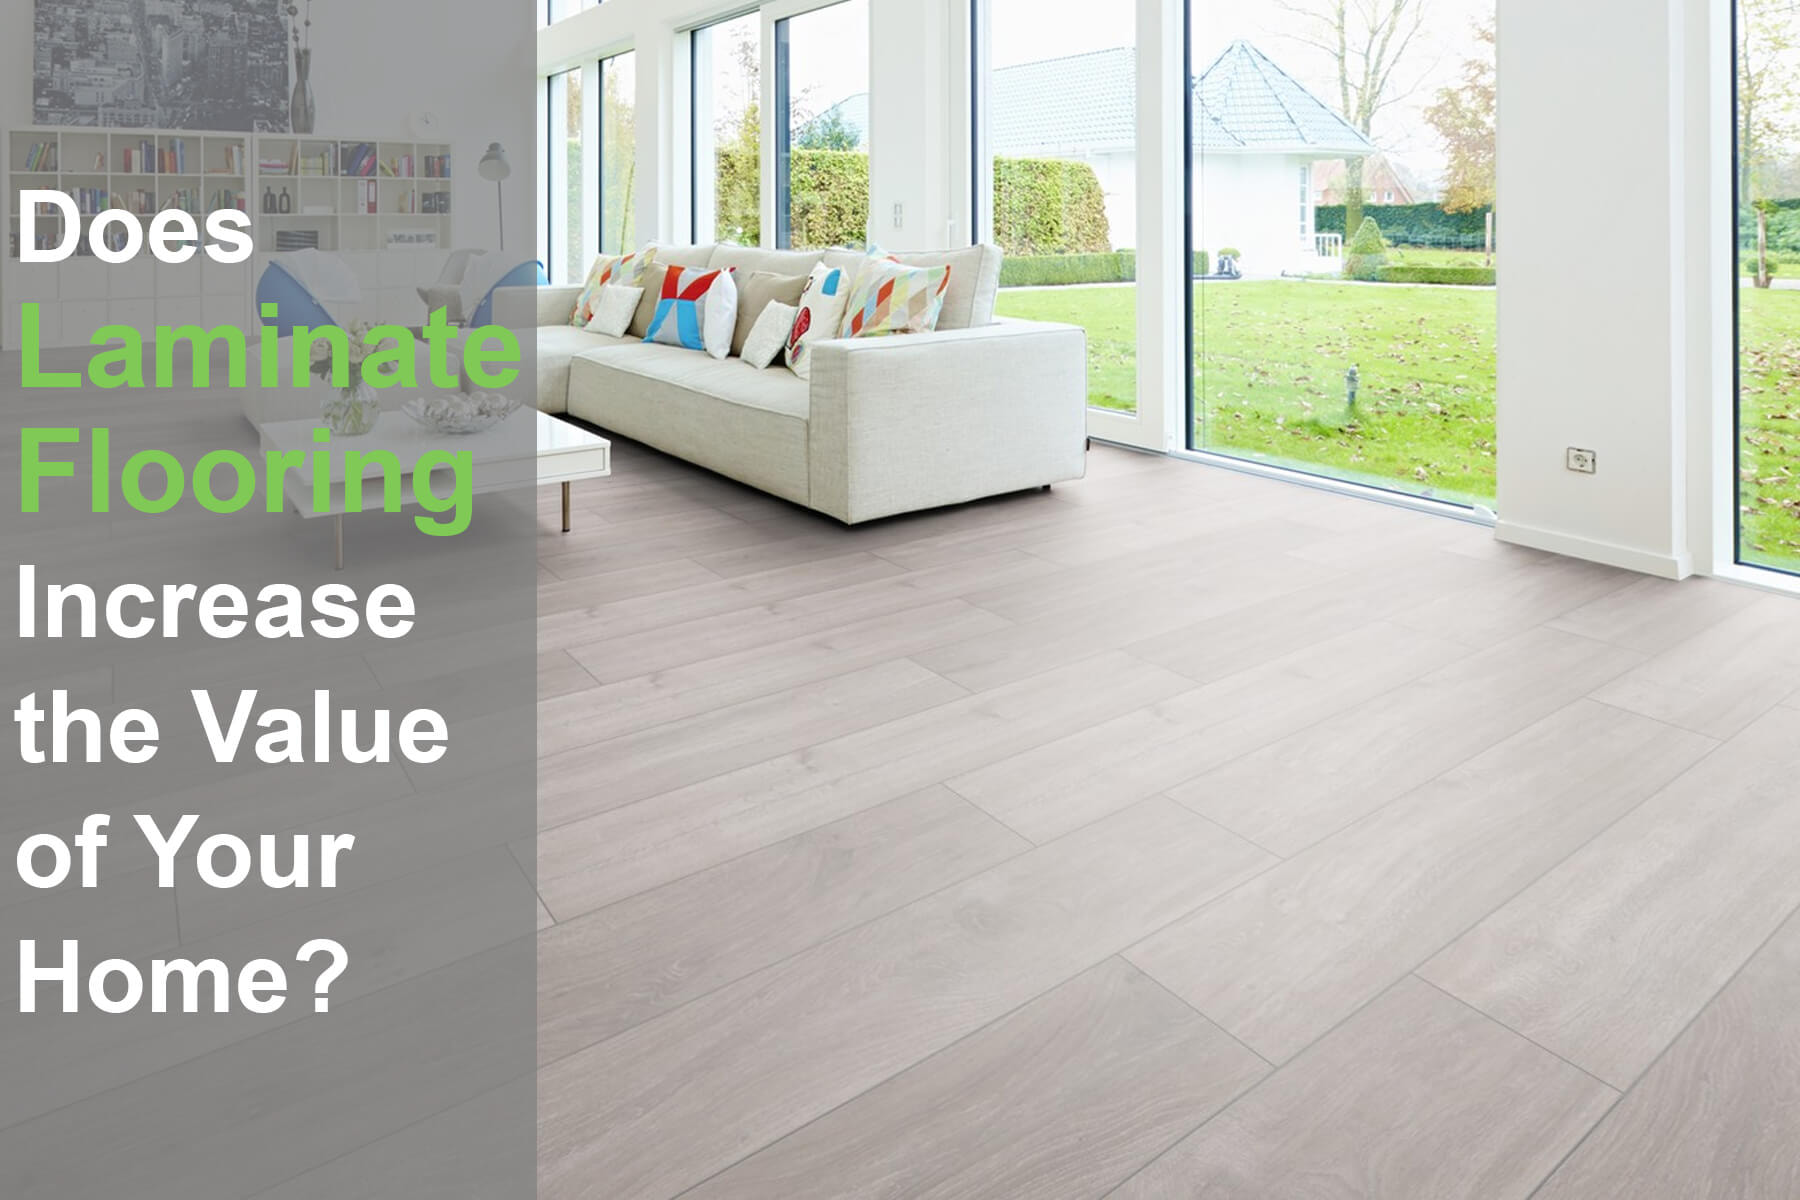 Does Laminate Flooring Increase The Value Of Your Home?